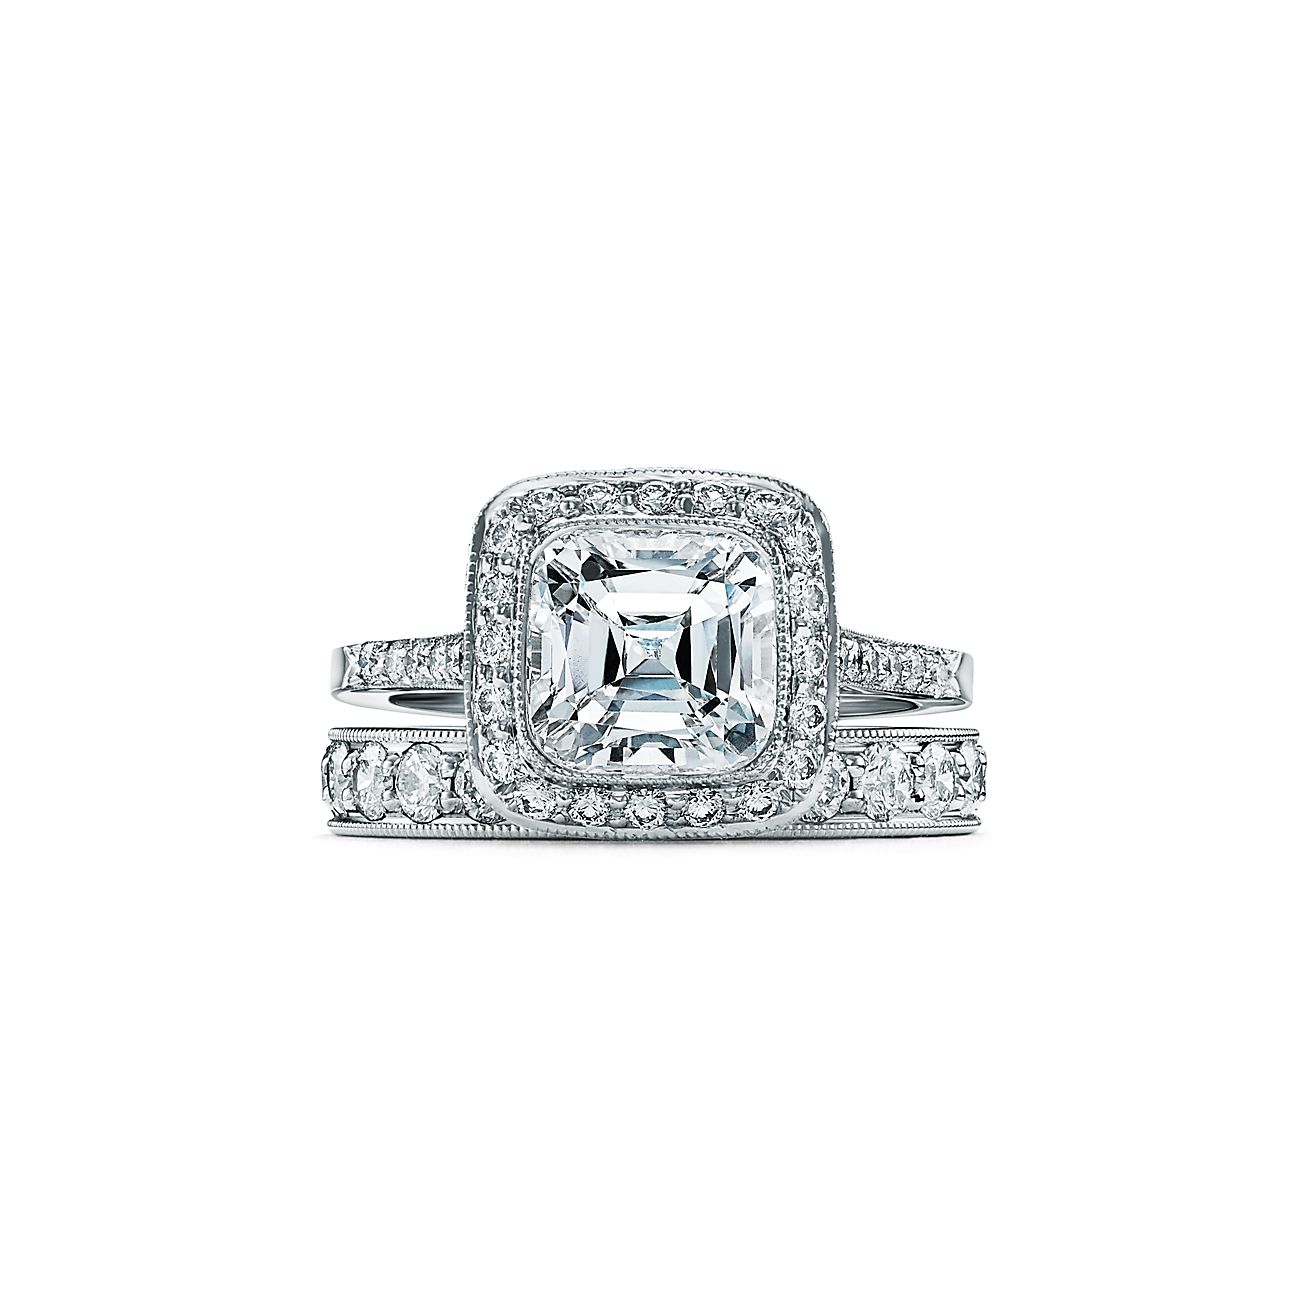 Tiffany Legacy® engagement ring with a 